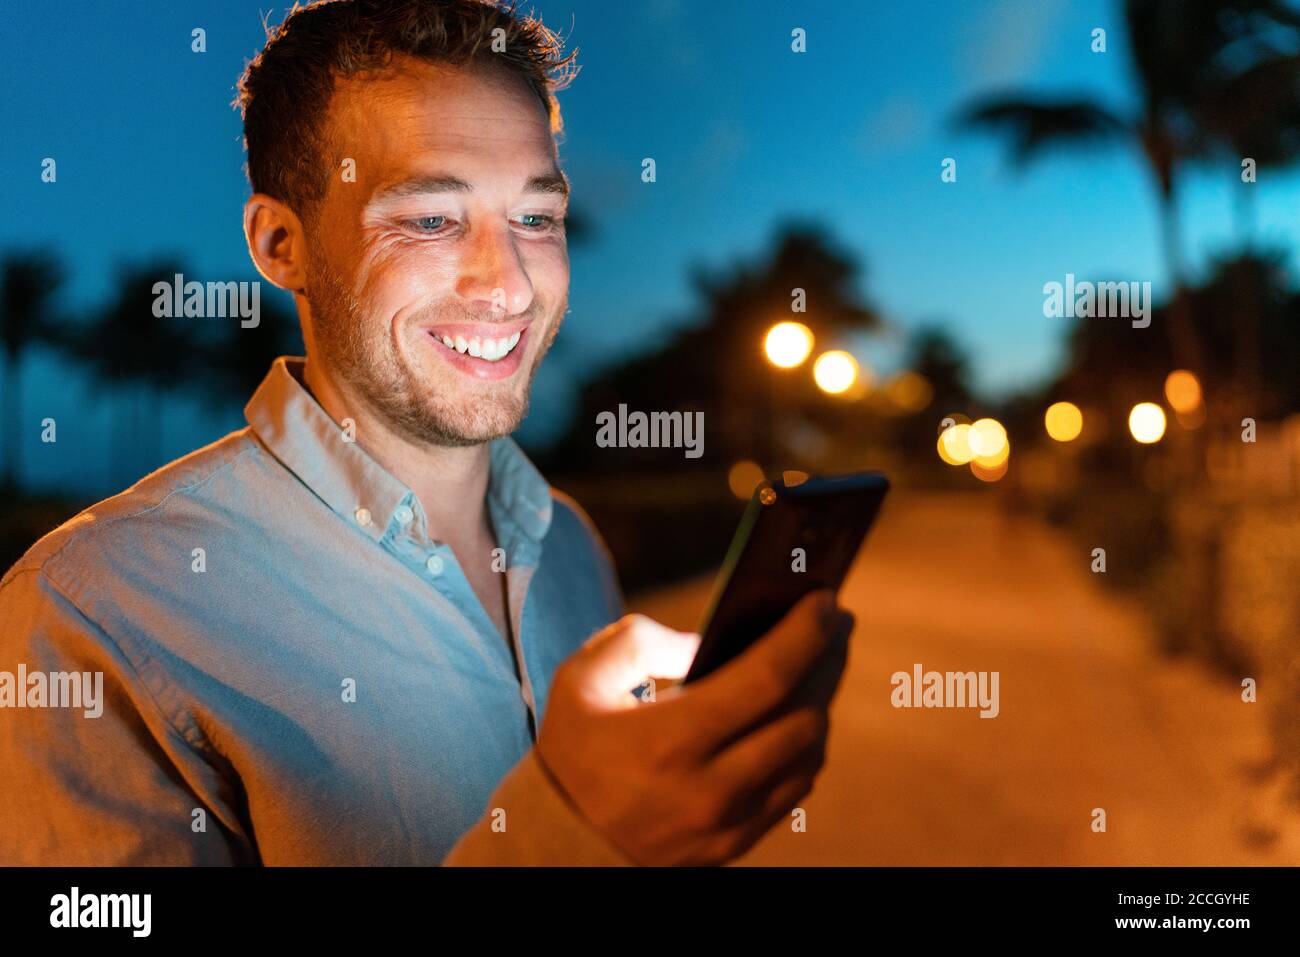 Man smiling looking at phone outside on city street at night texing online using smartphone. Young male face lit by screen light using mobile Stock Photo